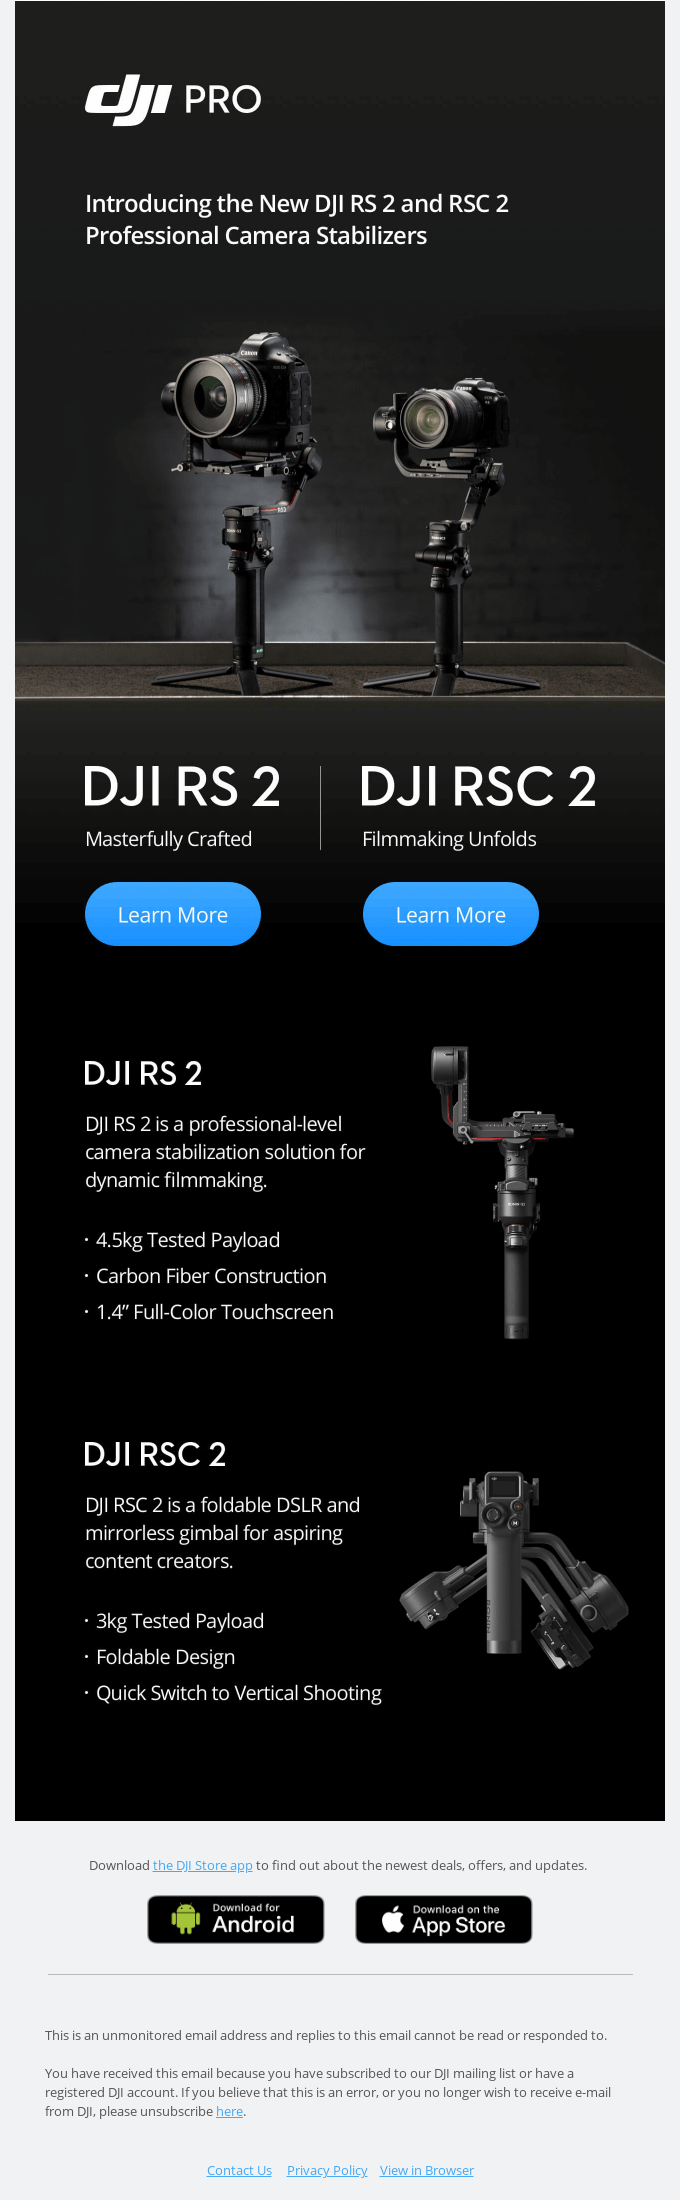 Introducing the New DJI RS 2 and RSC 2 Professional Camera Stabilizers